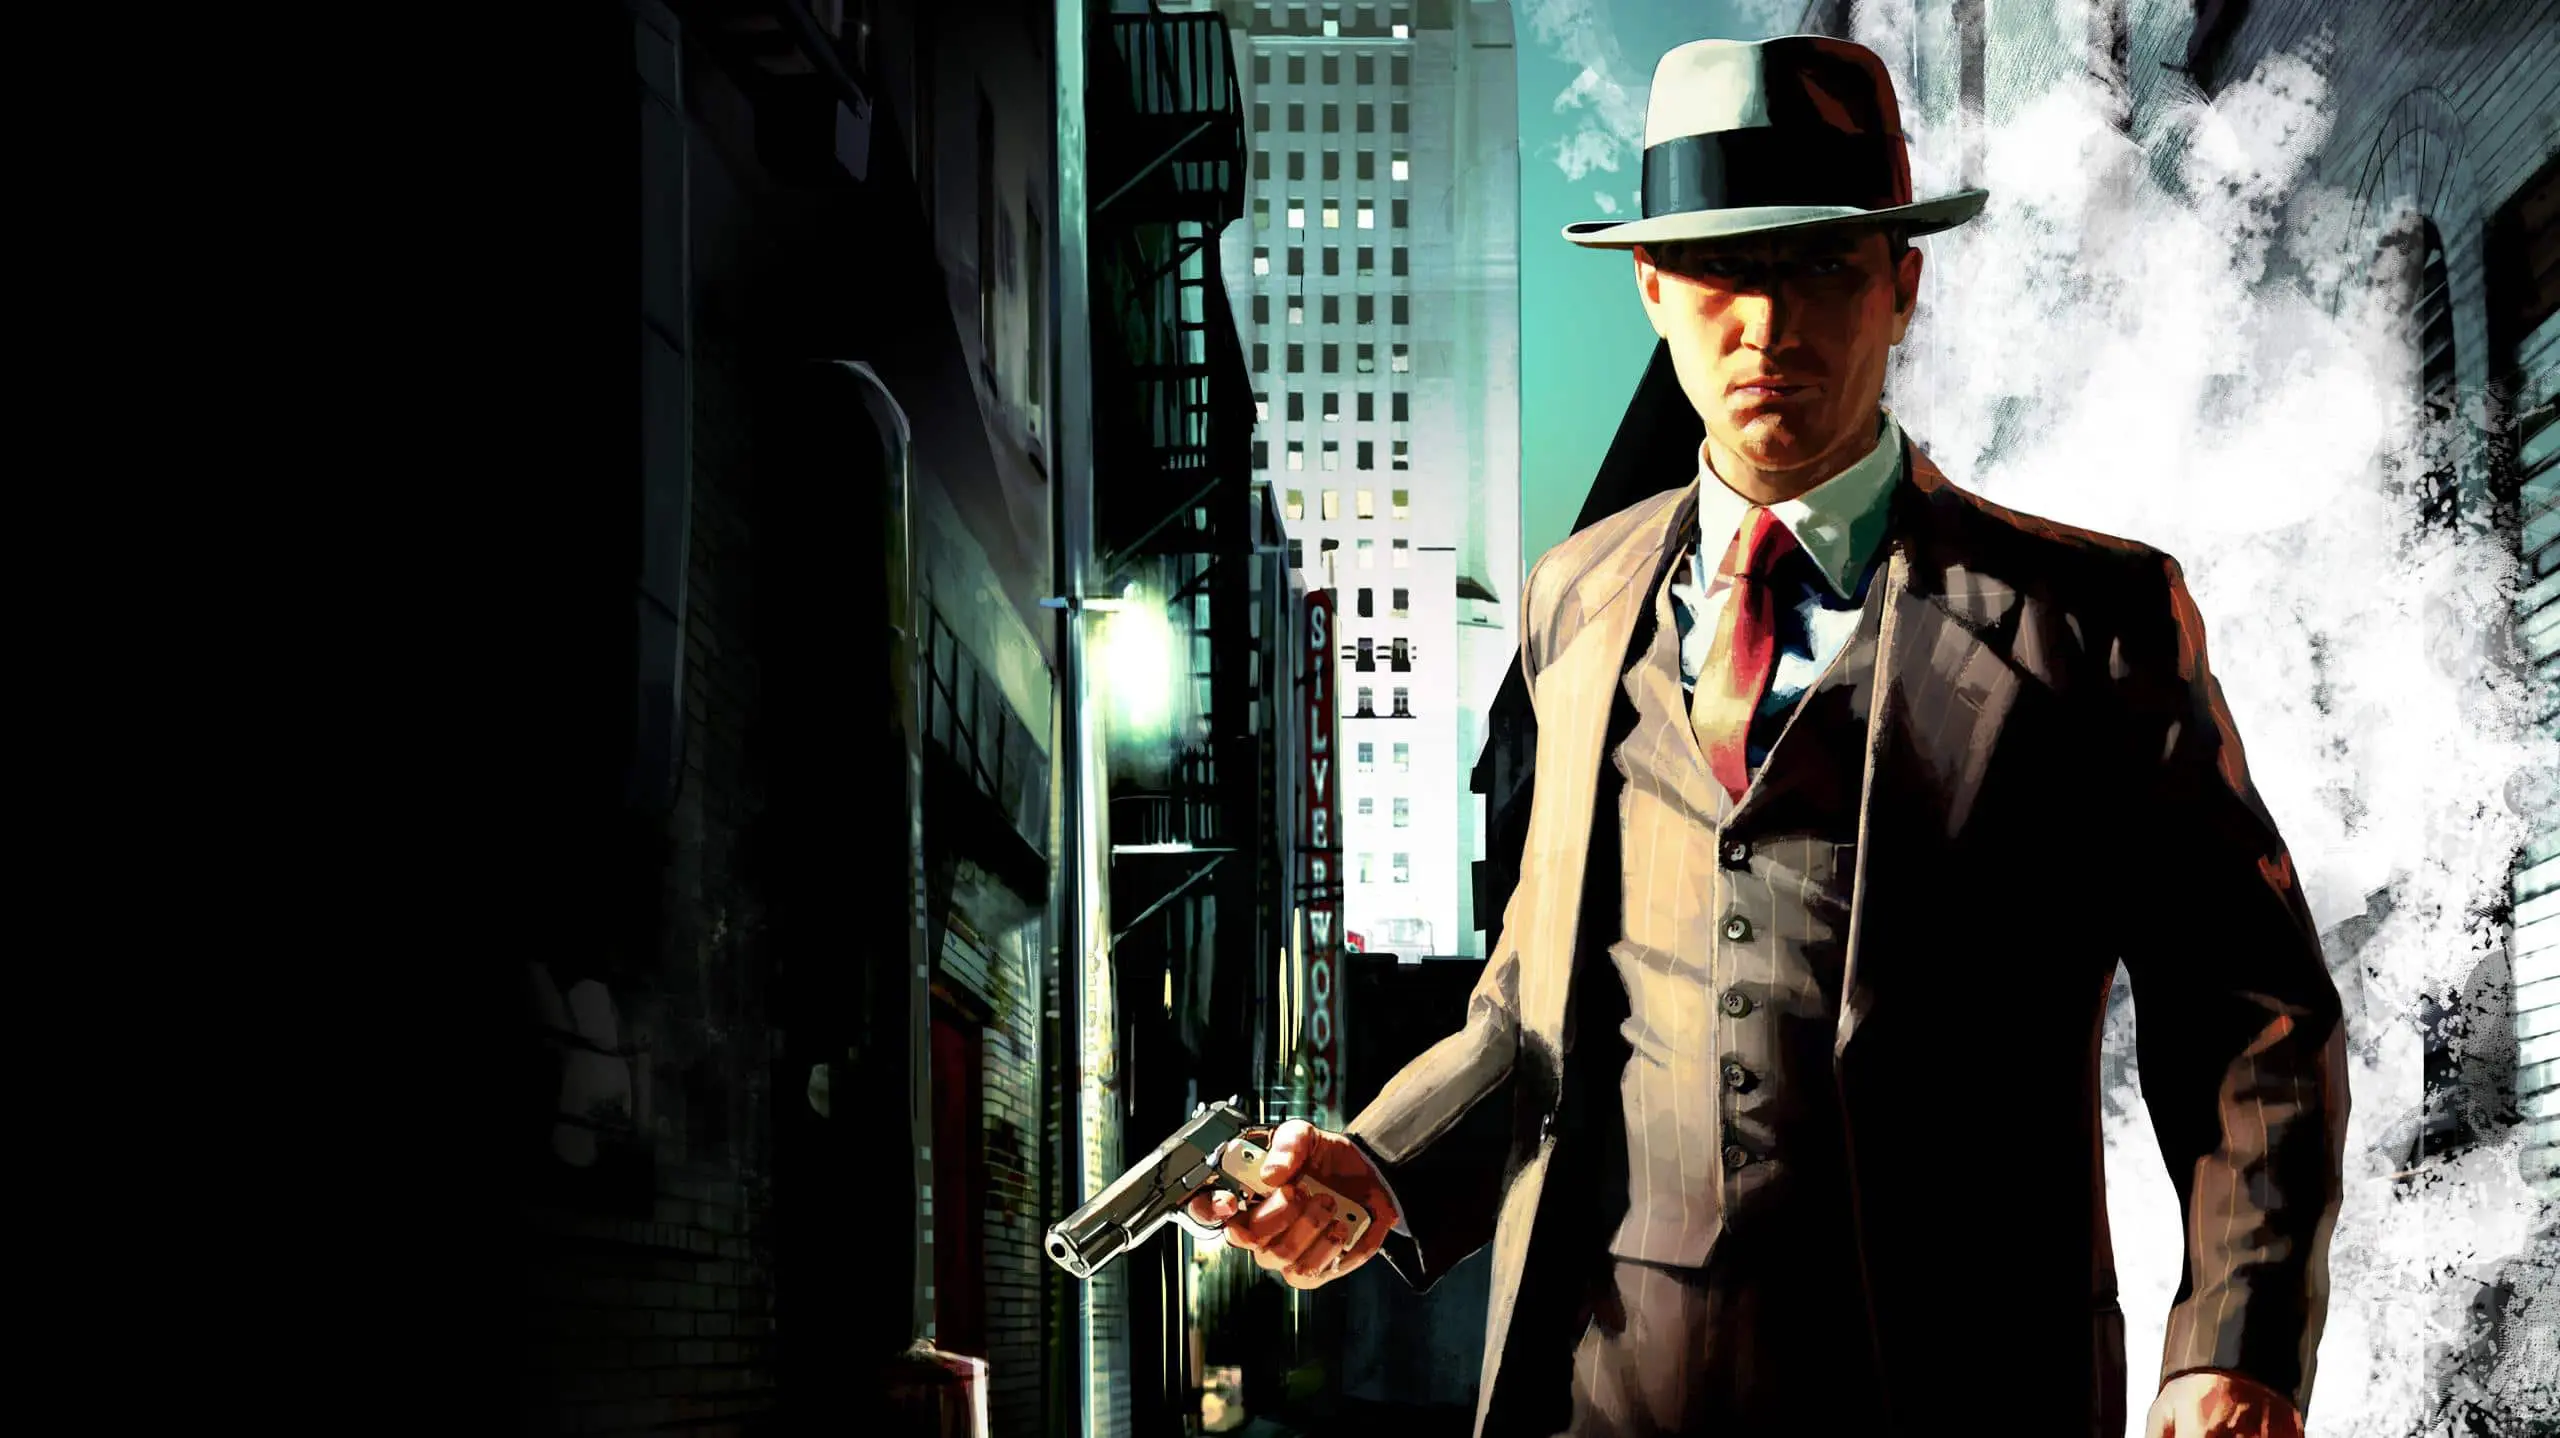 VIRTUOS PARTNERED WITH ROCKSTAR GAMES TO BRING THE ENHANCED VERSION OF L.A. NOIRE ON SWICH, PLAYSTATION 4, XBOX ONE AND VR